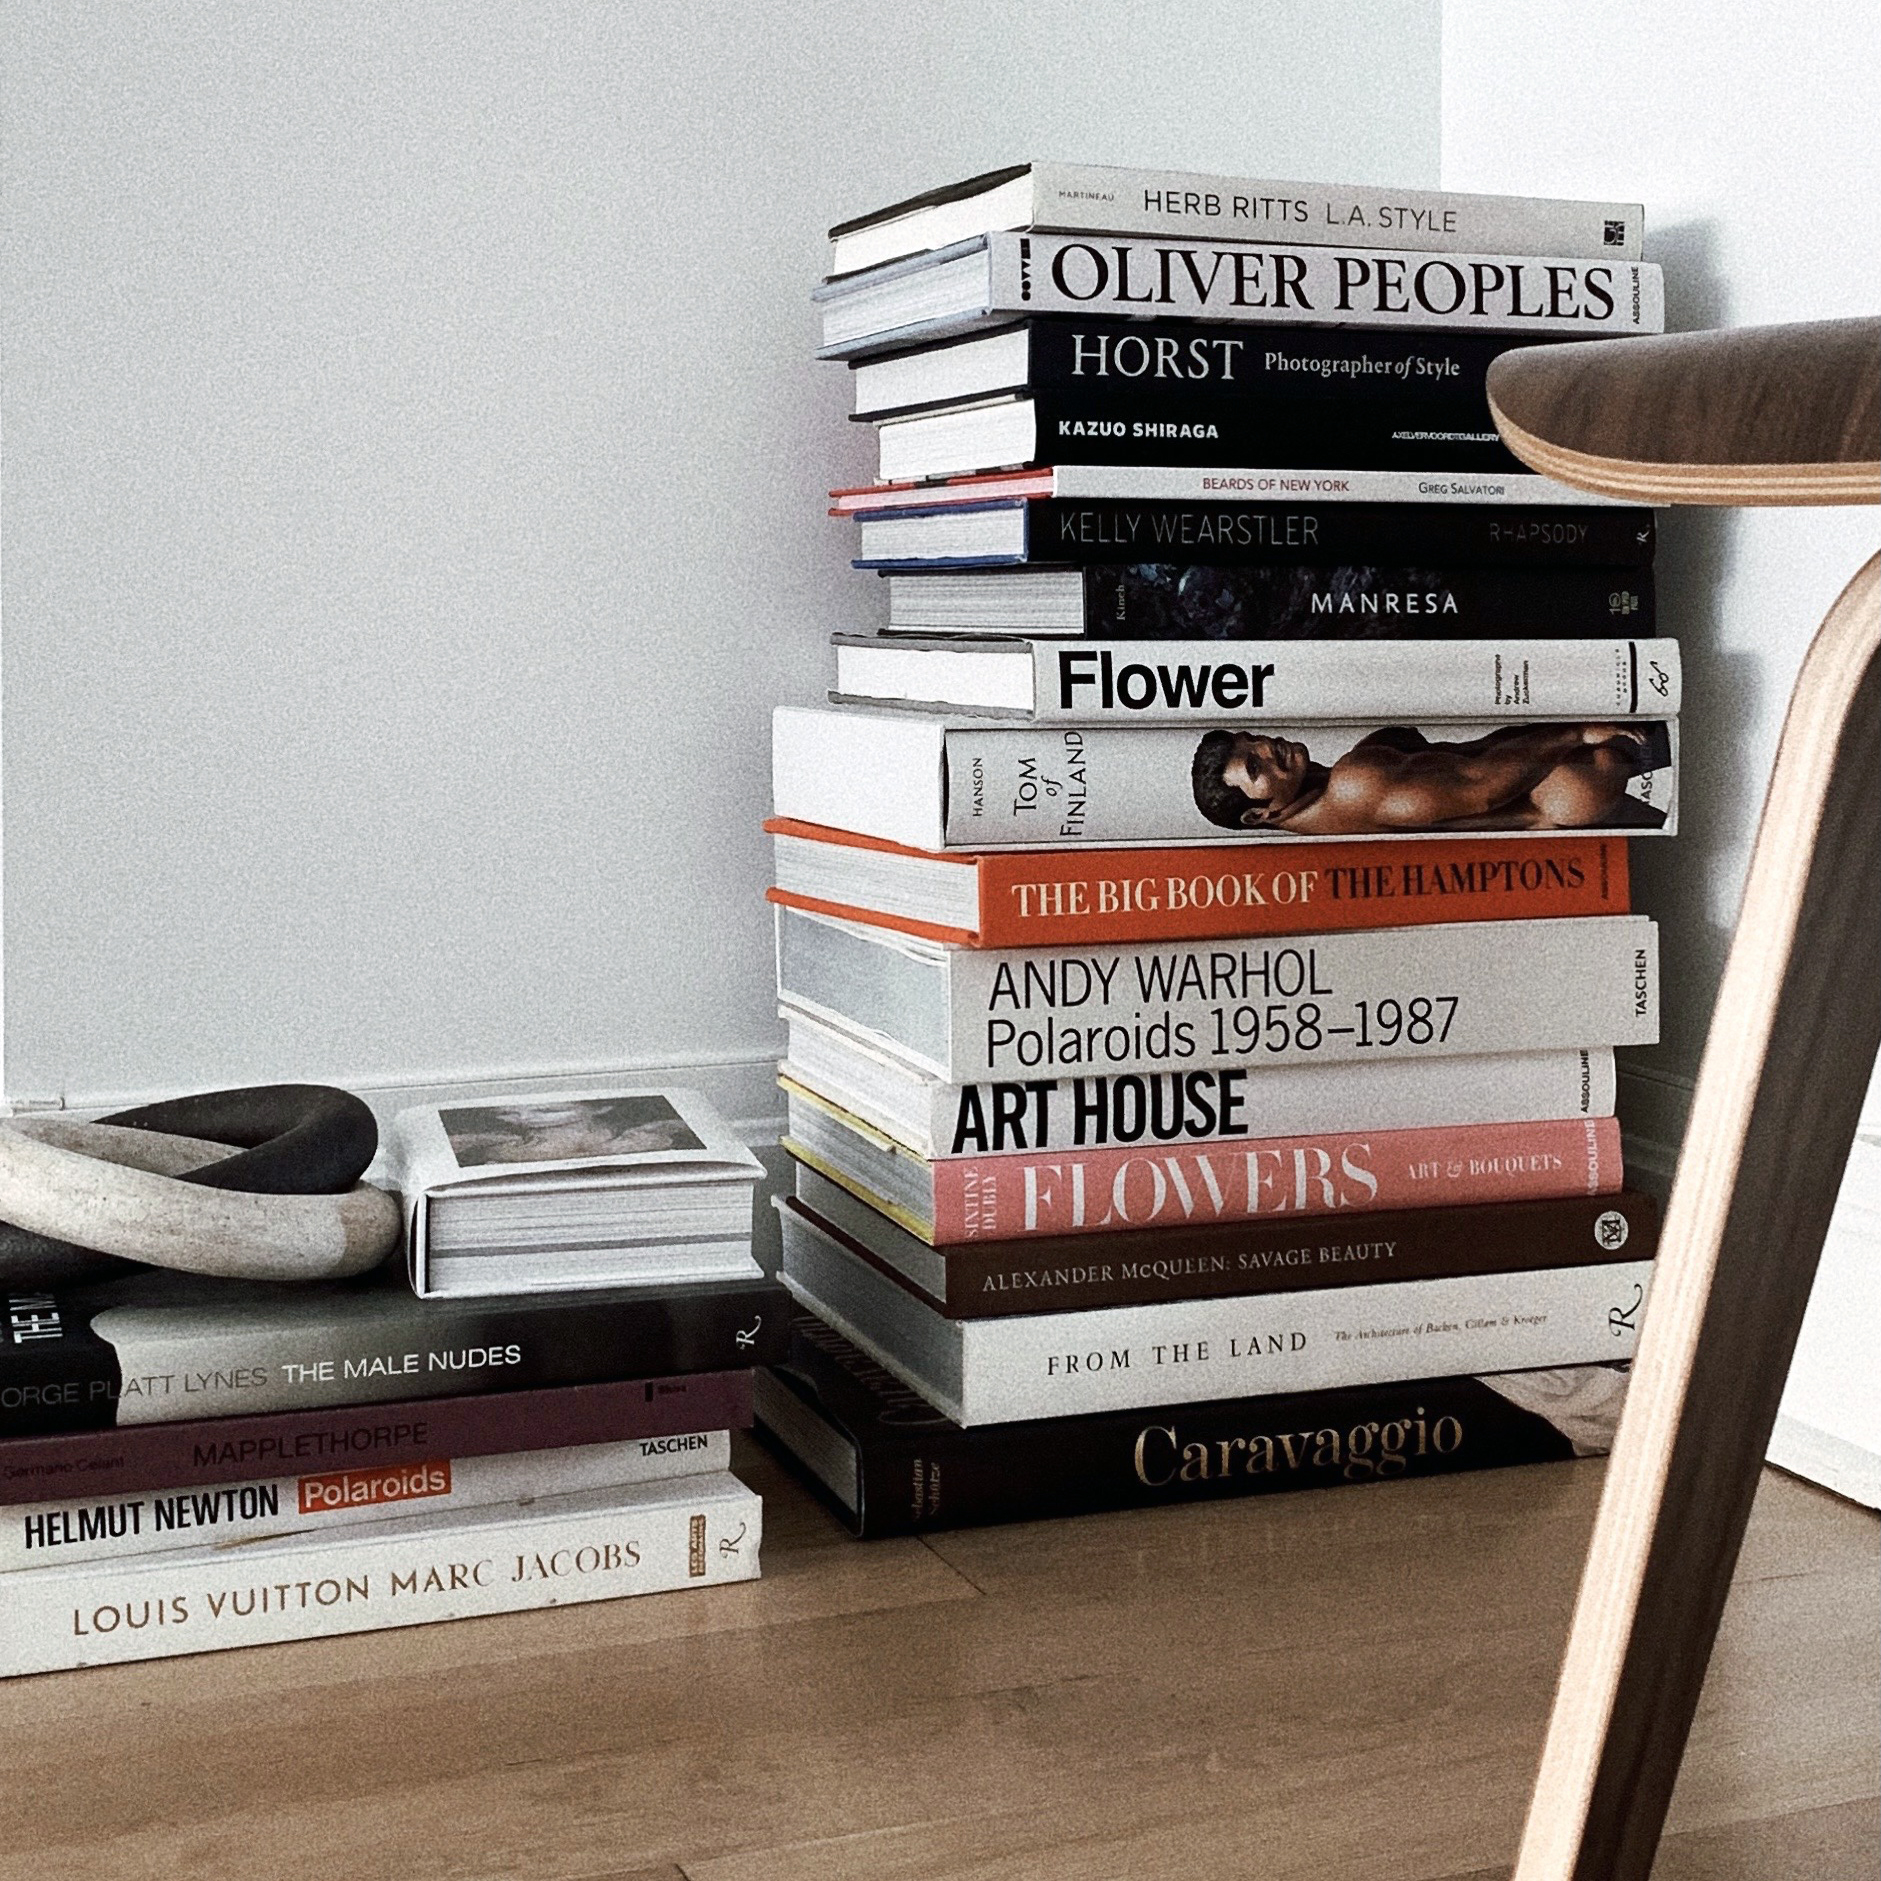 Coffee Table Books I Love, LuxMommy